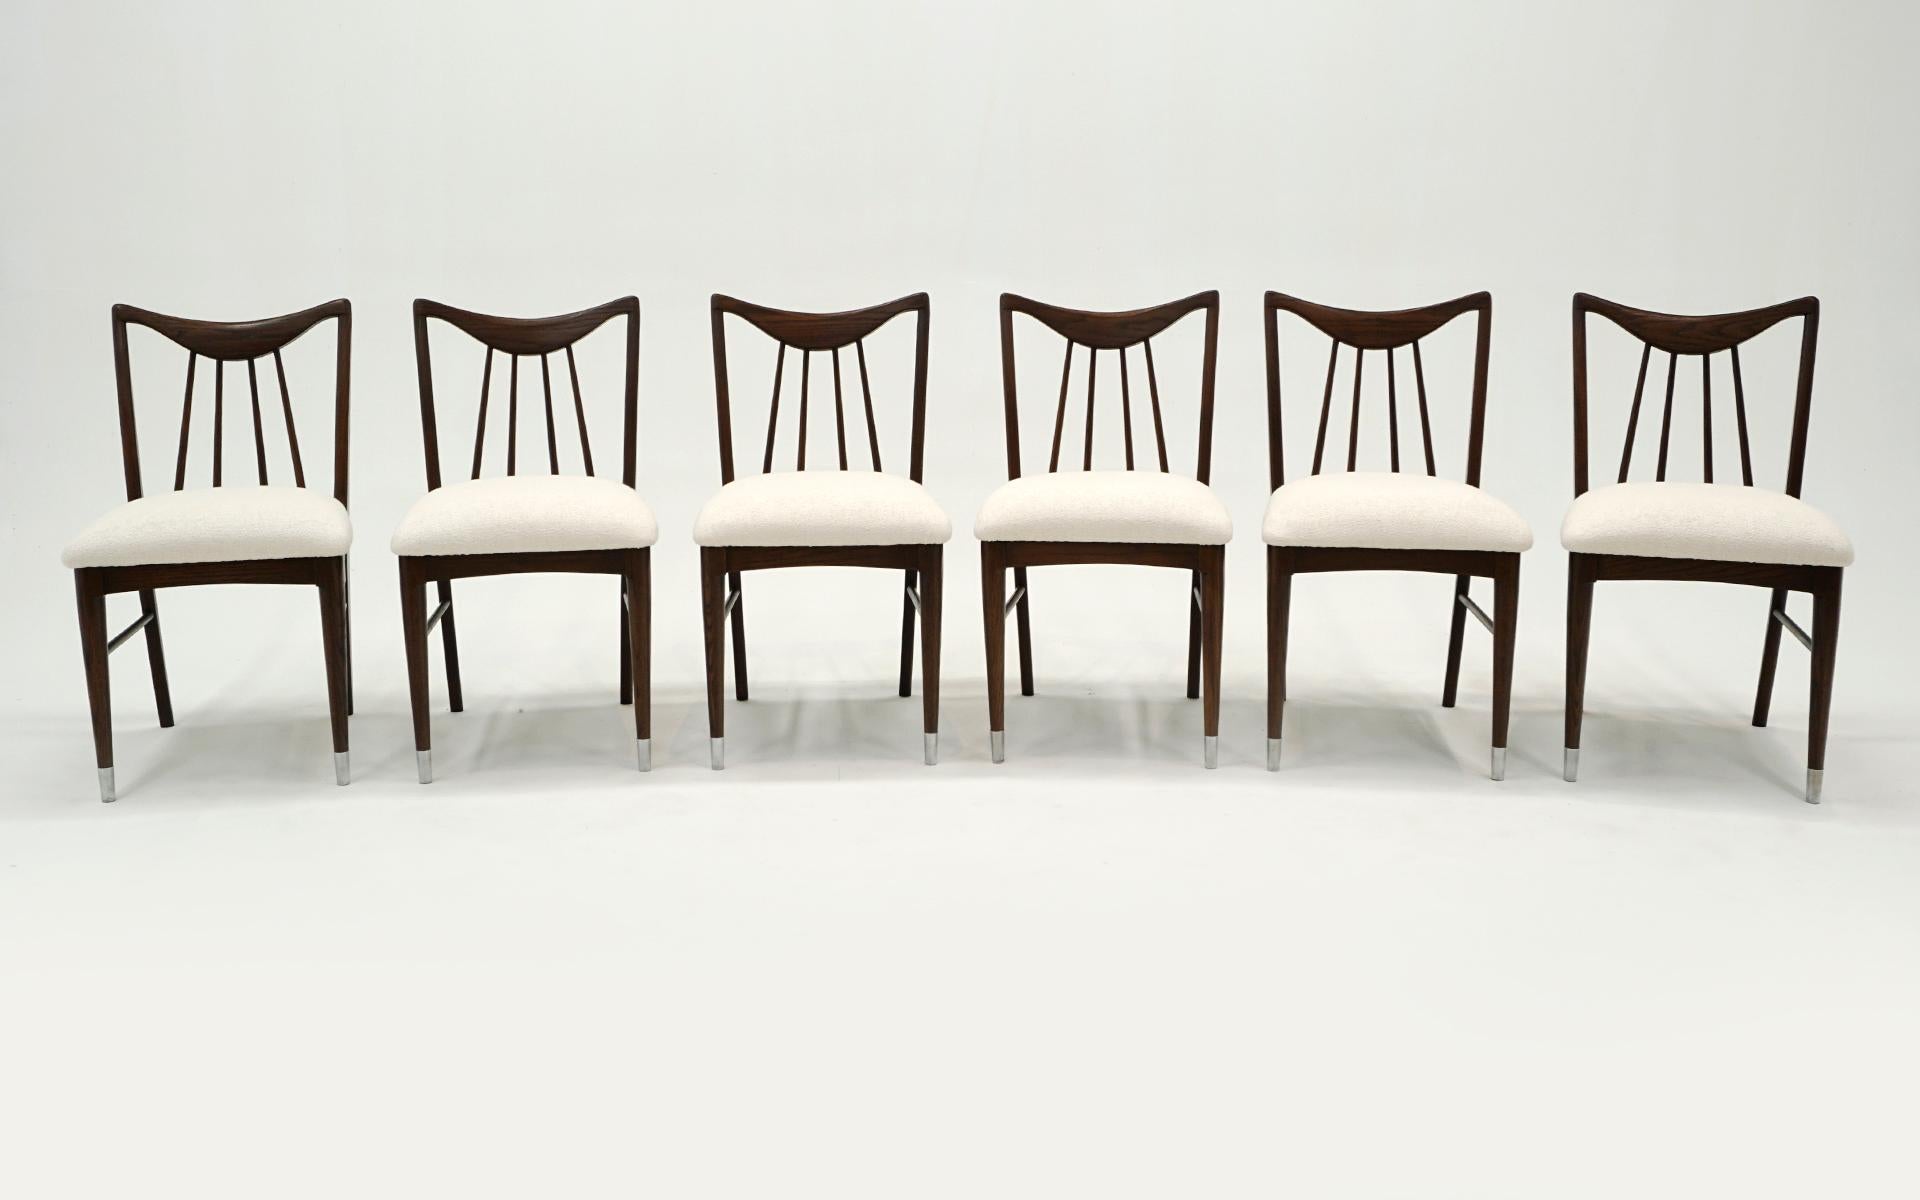 Set of 6 armless dining side chairs by Edmond / Edmund Spence for Keller.  These have been expertly refinished and reupholstered in an off white boucle.  Original chrome sabots on the front legs of each chair.  Great set, ready to ship.